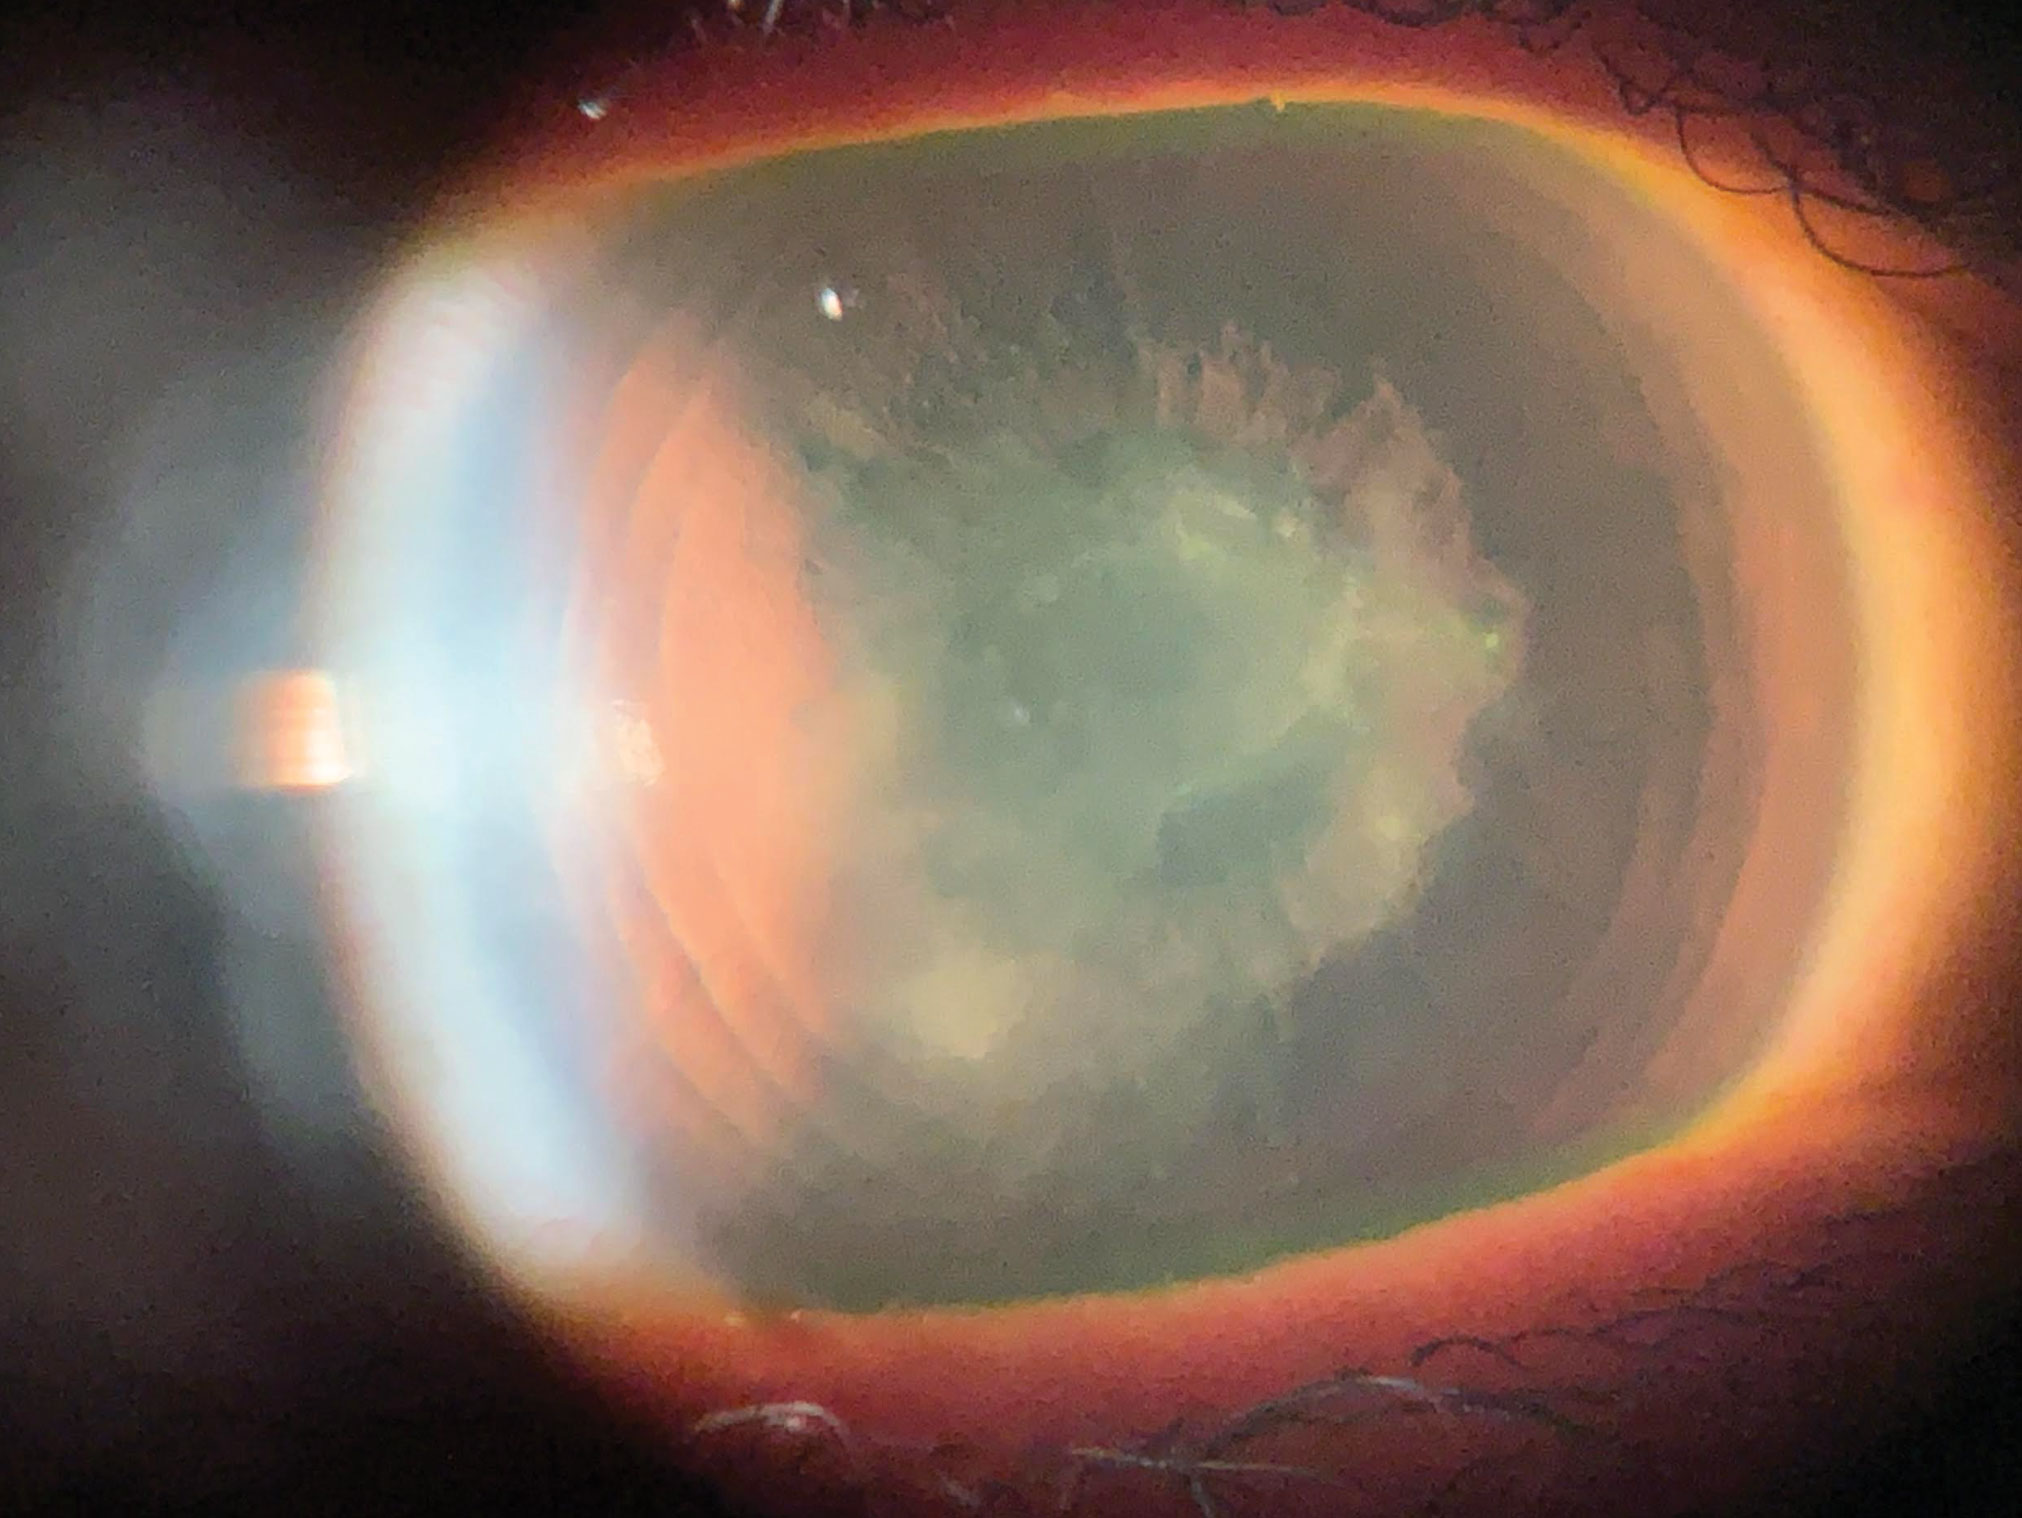 A corneal scar from HSVK with a persistent epithelial defect after a corneal erosion.